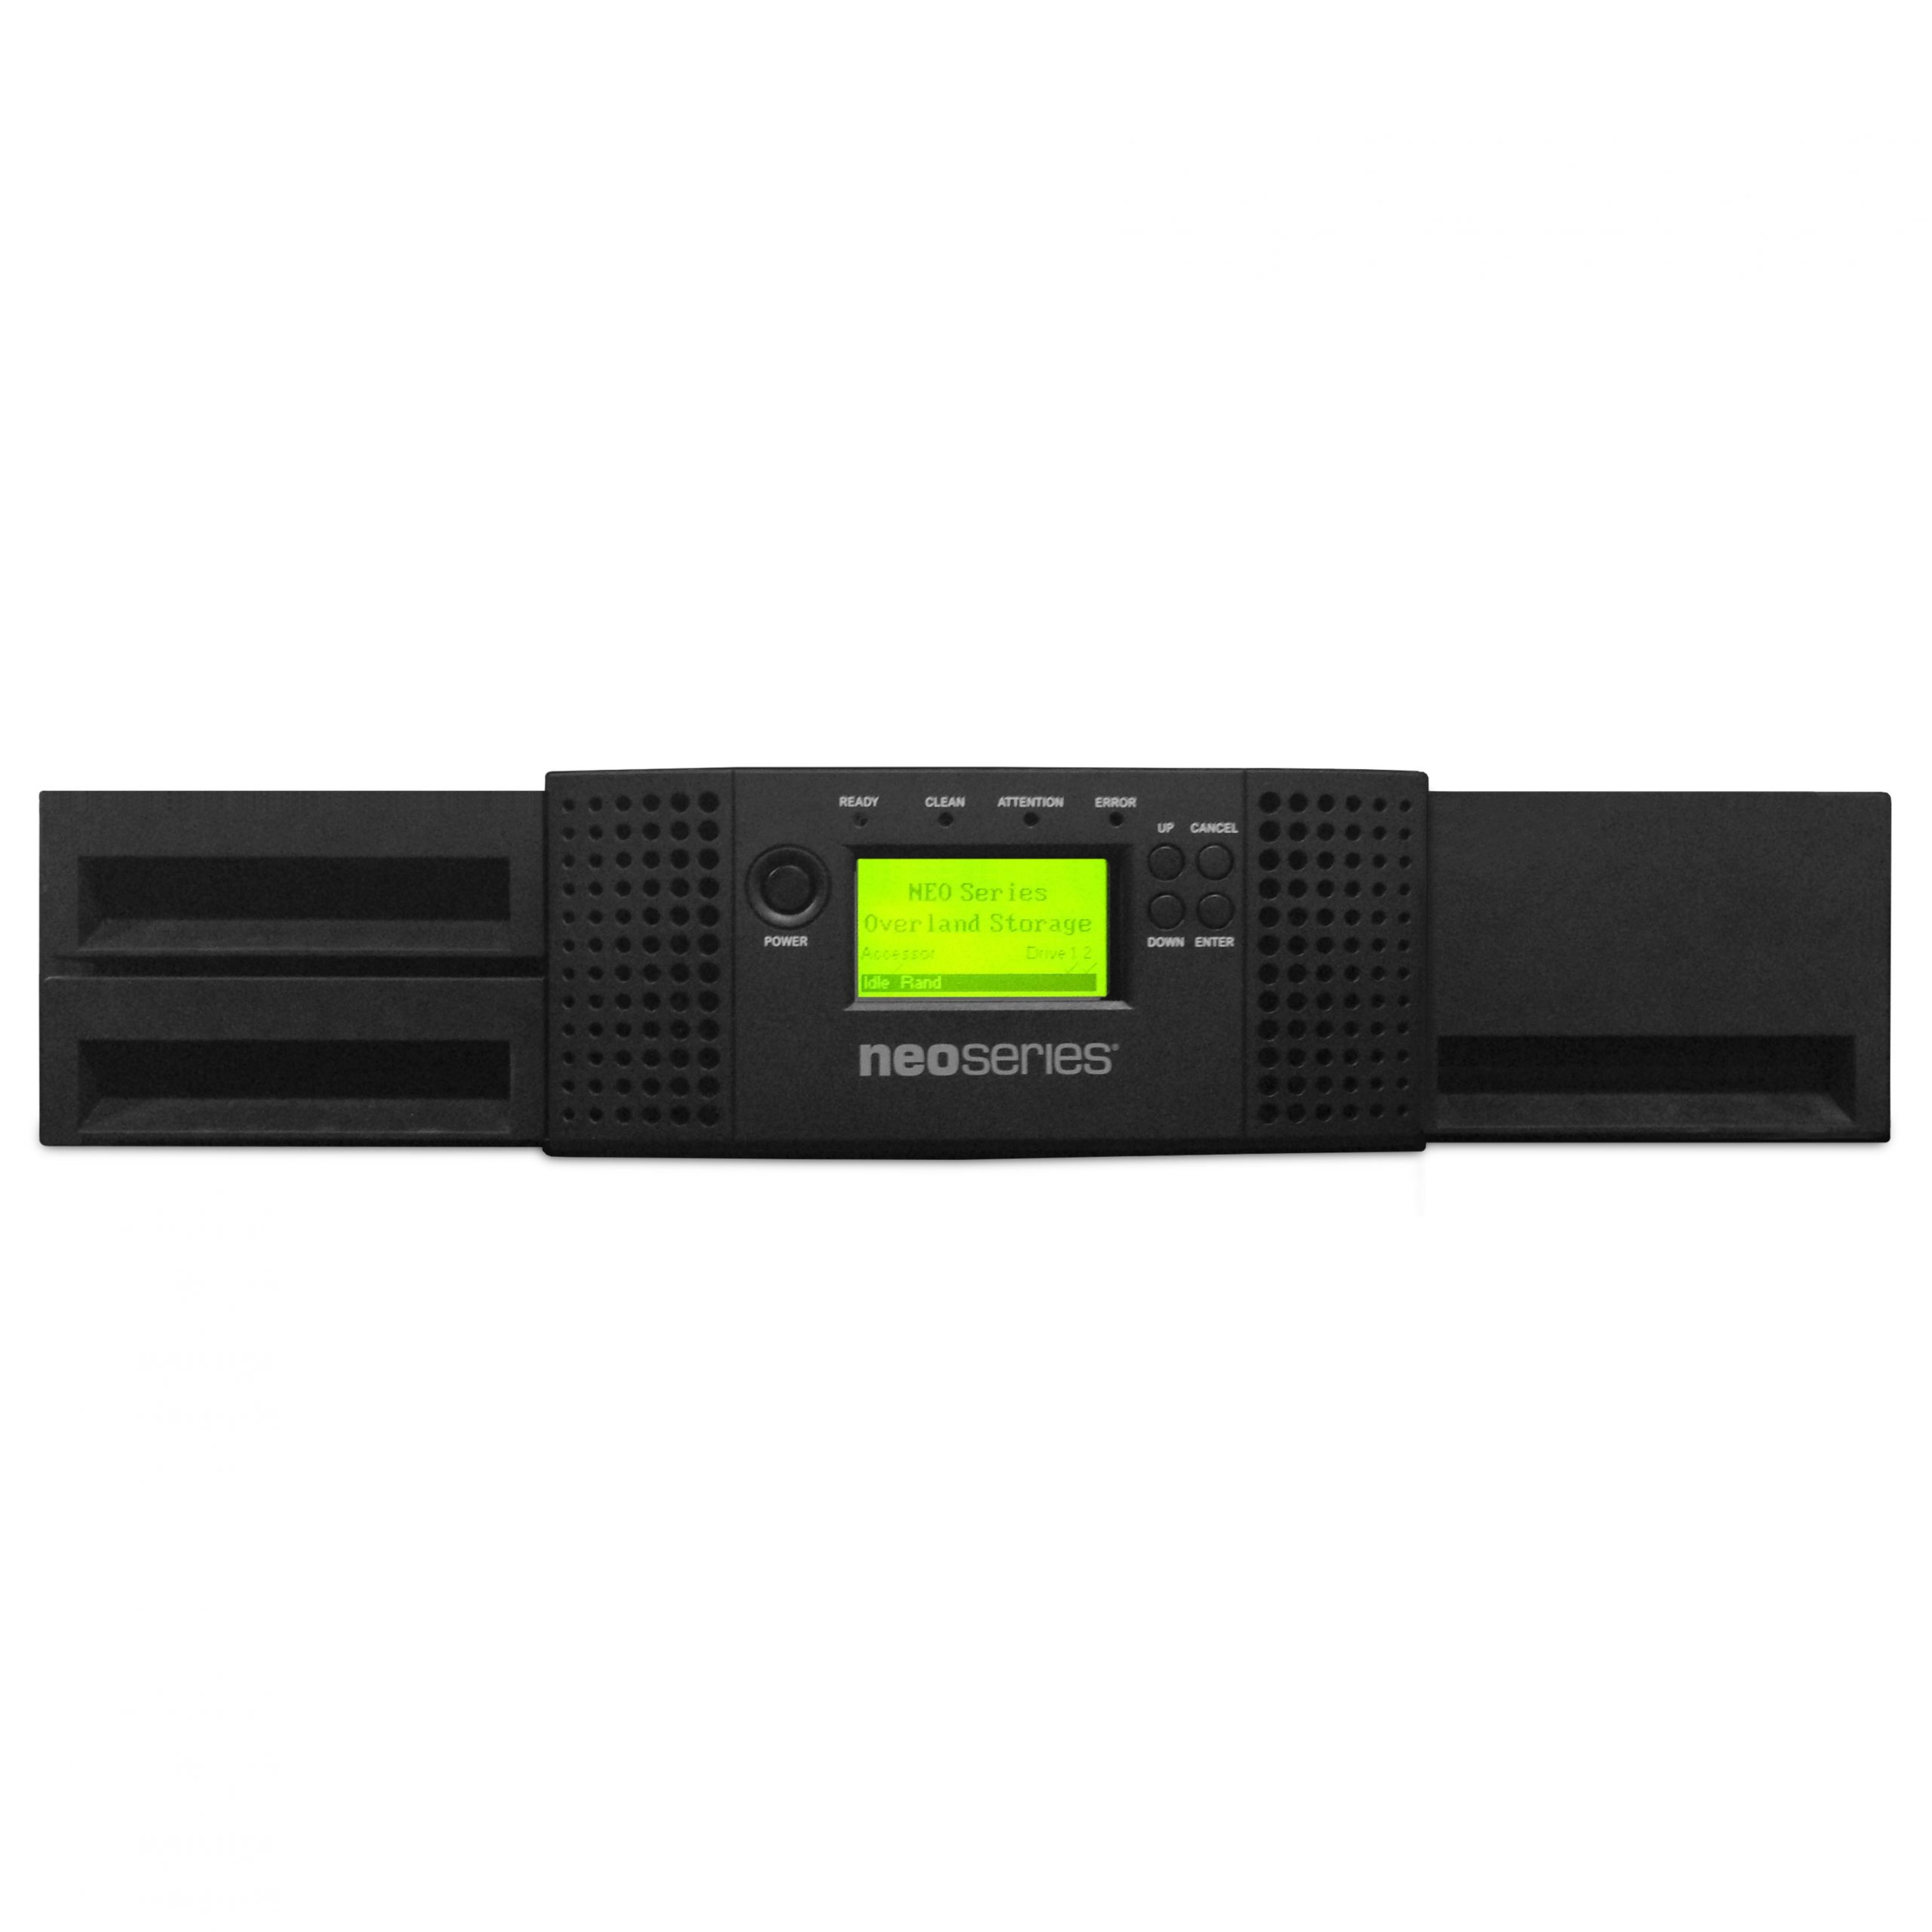 Overland NEOs T24 Tape Autoloader1 x Drive/24 x Slot1 Mail Slots2 Drives SupportedLTO-660 TB (Native) / 150 TB (Compressed)… OV-NEOST246FC